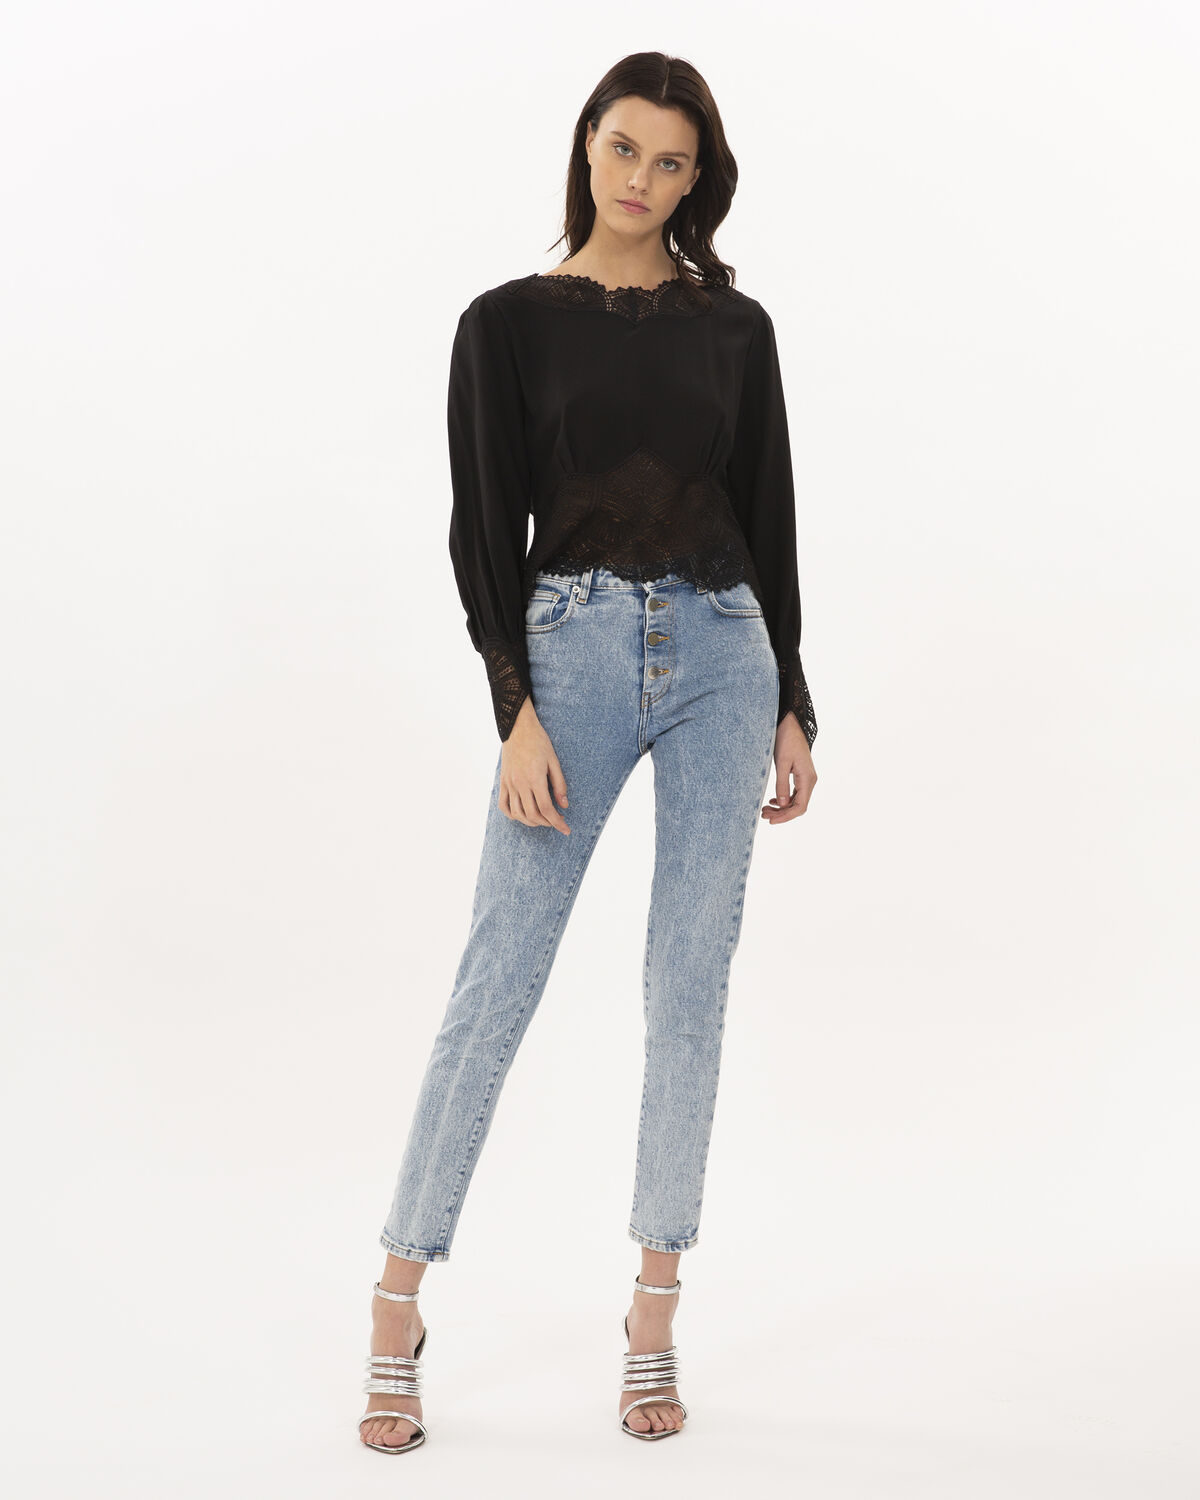 Photo of IRO Paris Ivya Top Black - This Top Plays On The Effects Of Volume With Its Tight Hook Lace At The Ends And Its Long Sleeves Slightly Puffed. Its Low Neckline Plunging Into The Back Will Bring A Chic Touch To Your Outfits. Spring Summer 19